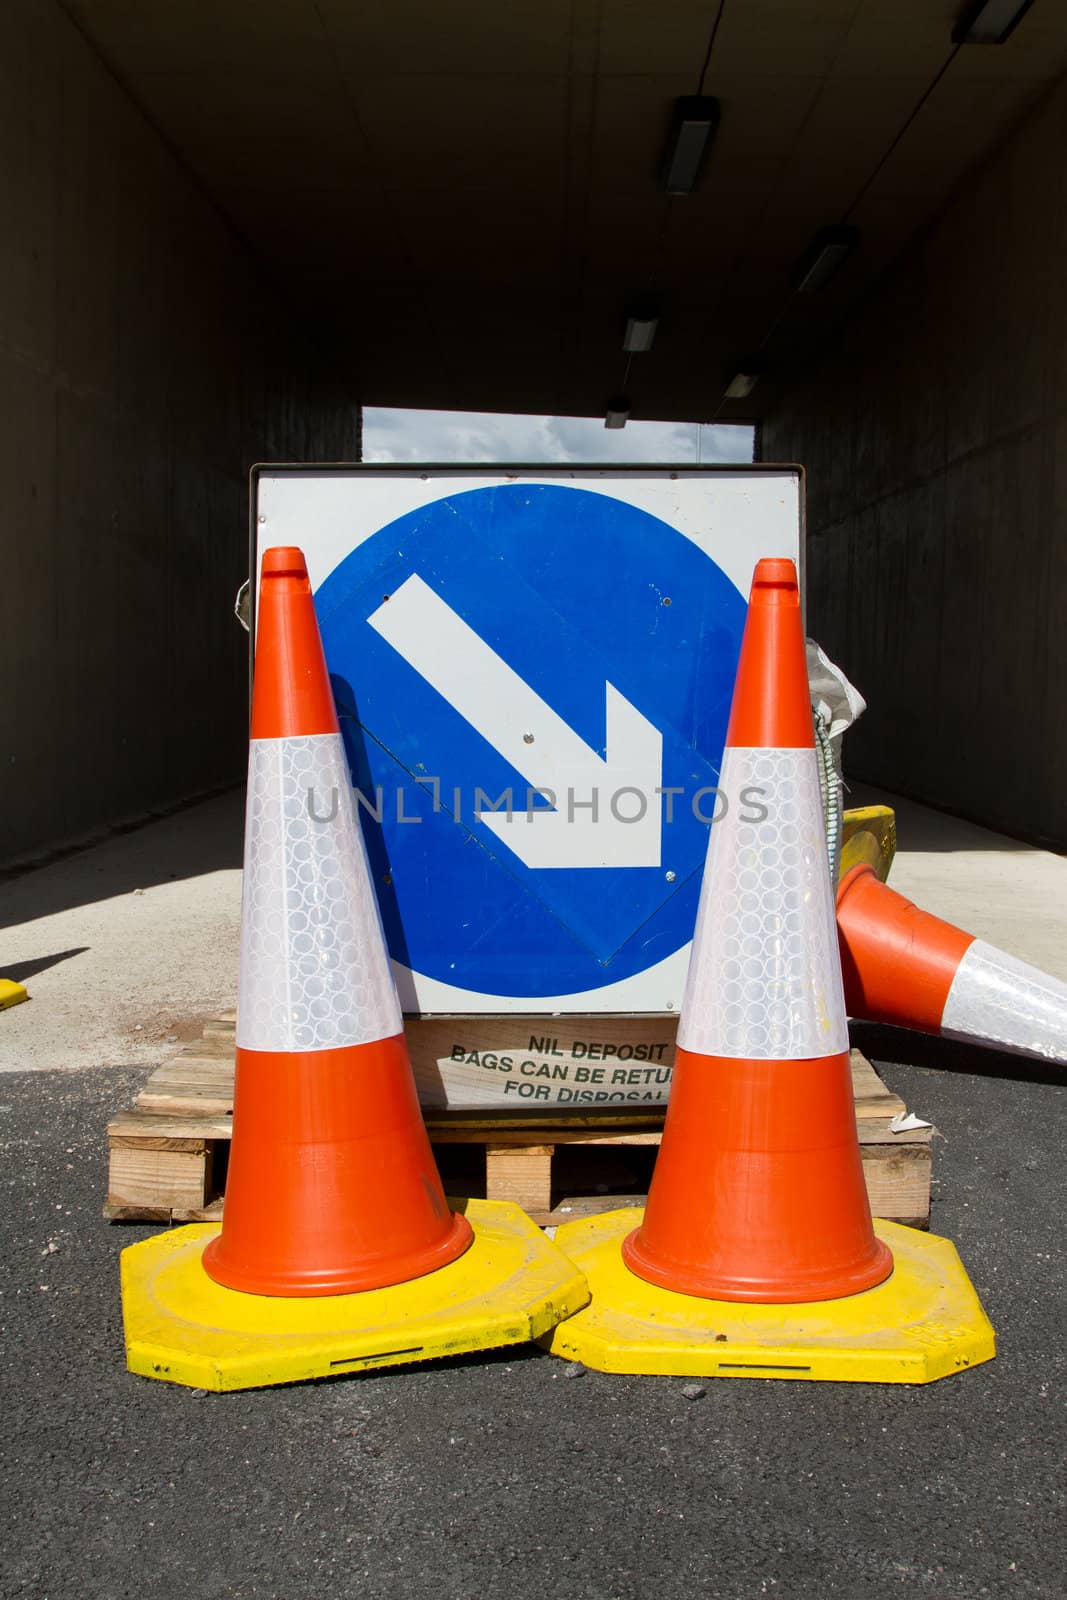 A pair of red, white and yellow bollards in front of a blue circular sign with a white arrow.